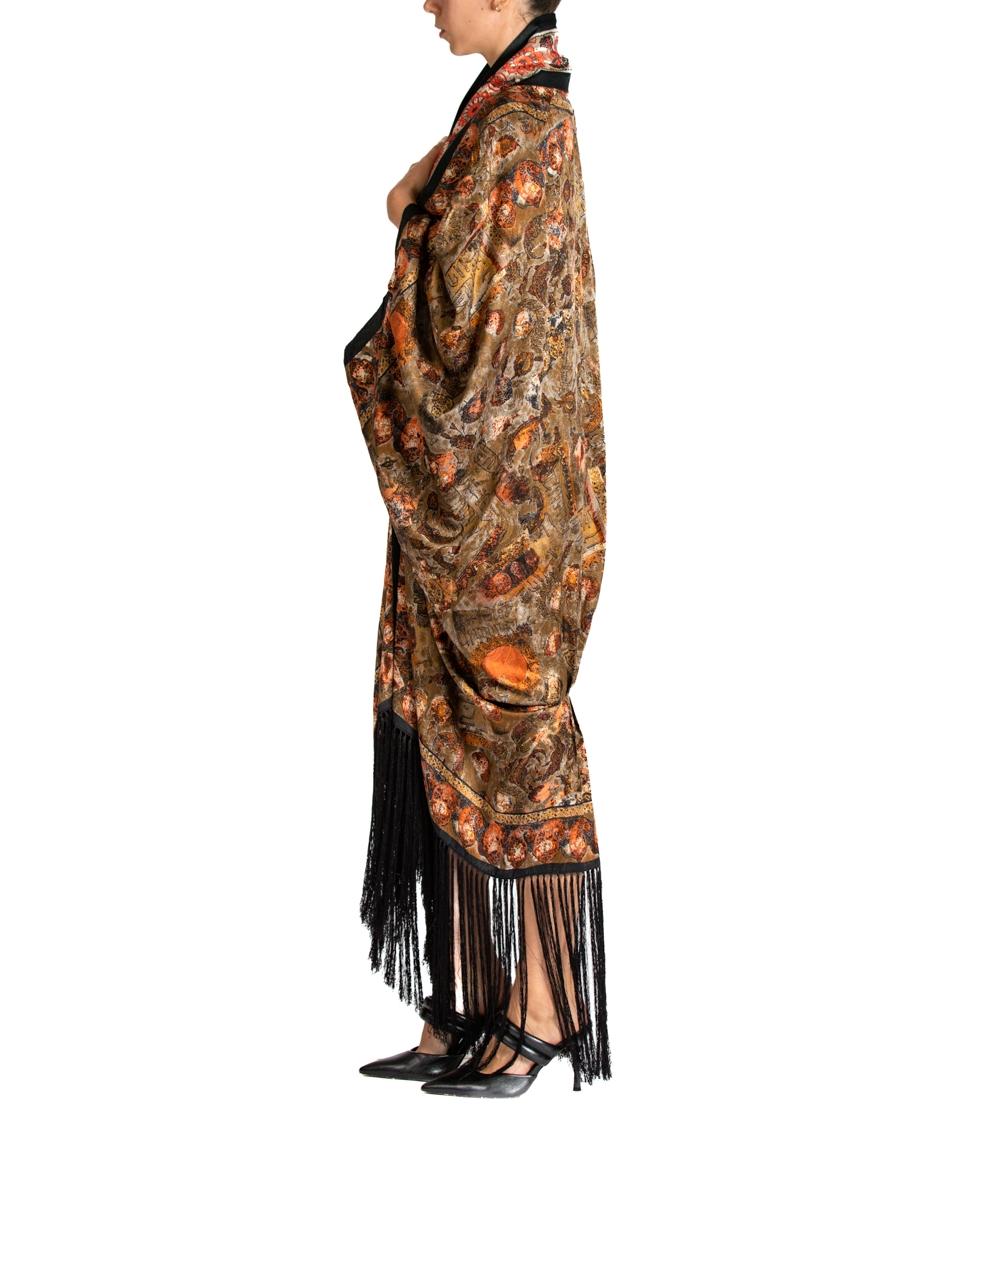 MORPHEW ATELIER Orange & Black Silk Hand Embroidered Floral Piano Shawl Cocoon 1